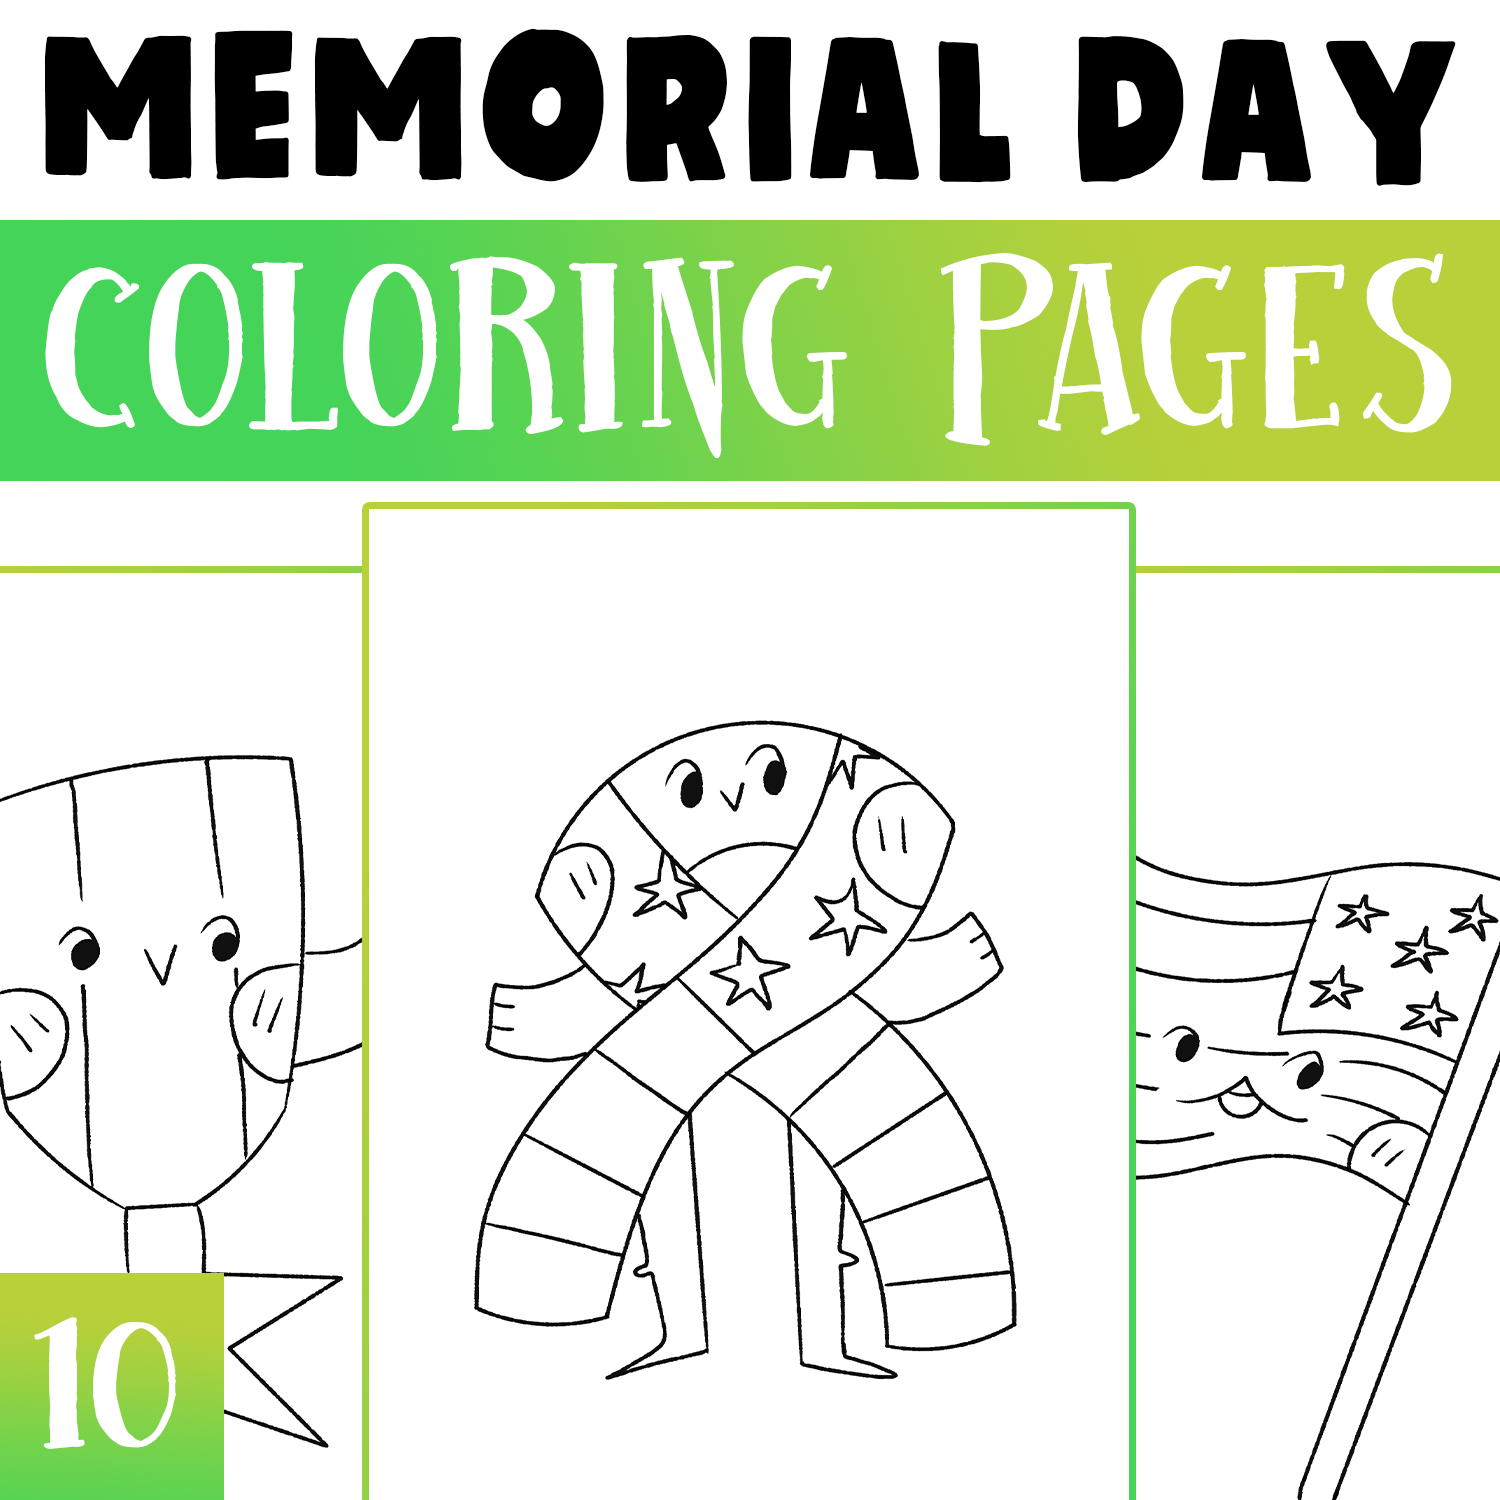 Memorial day coloring pages memorial day coloring sheet activity morning work made by teachers